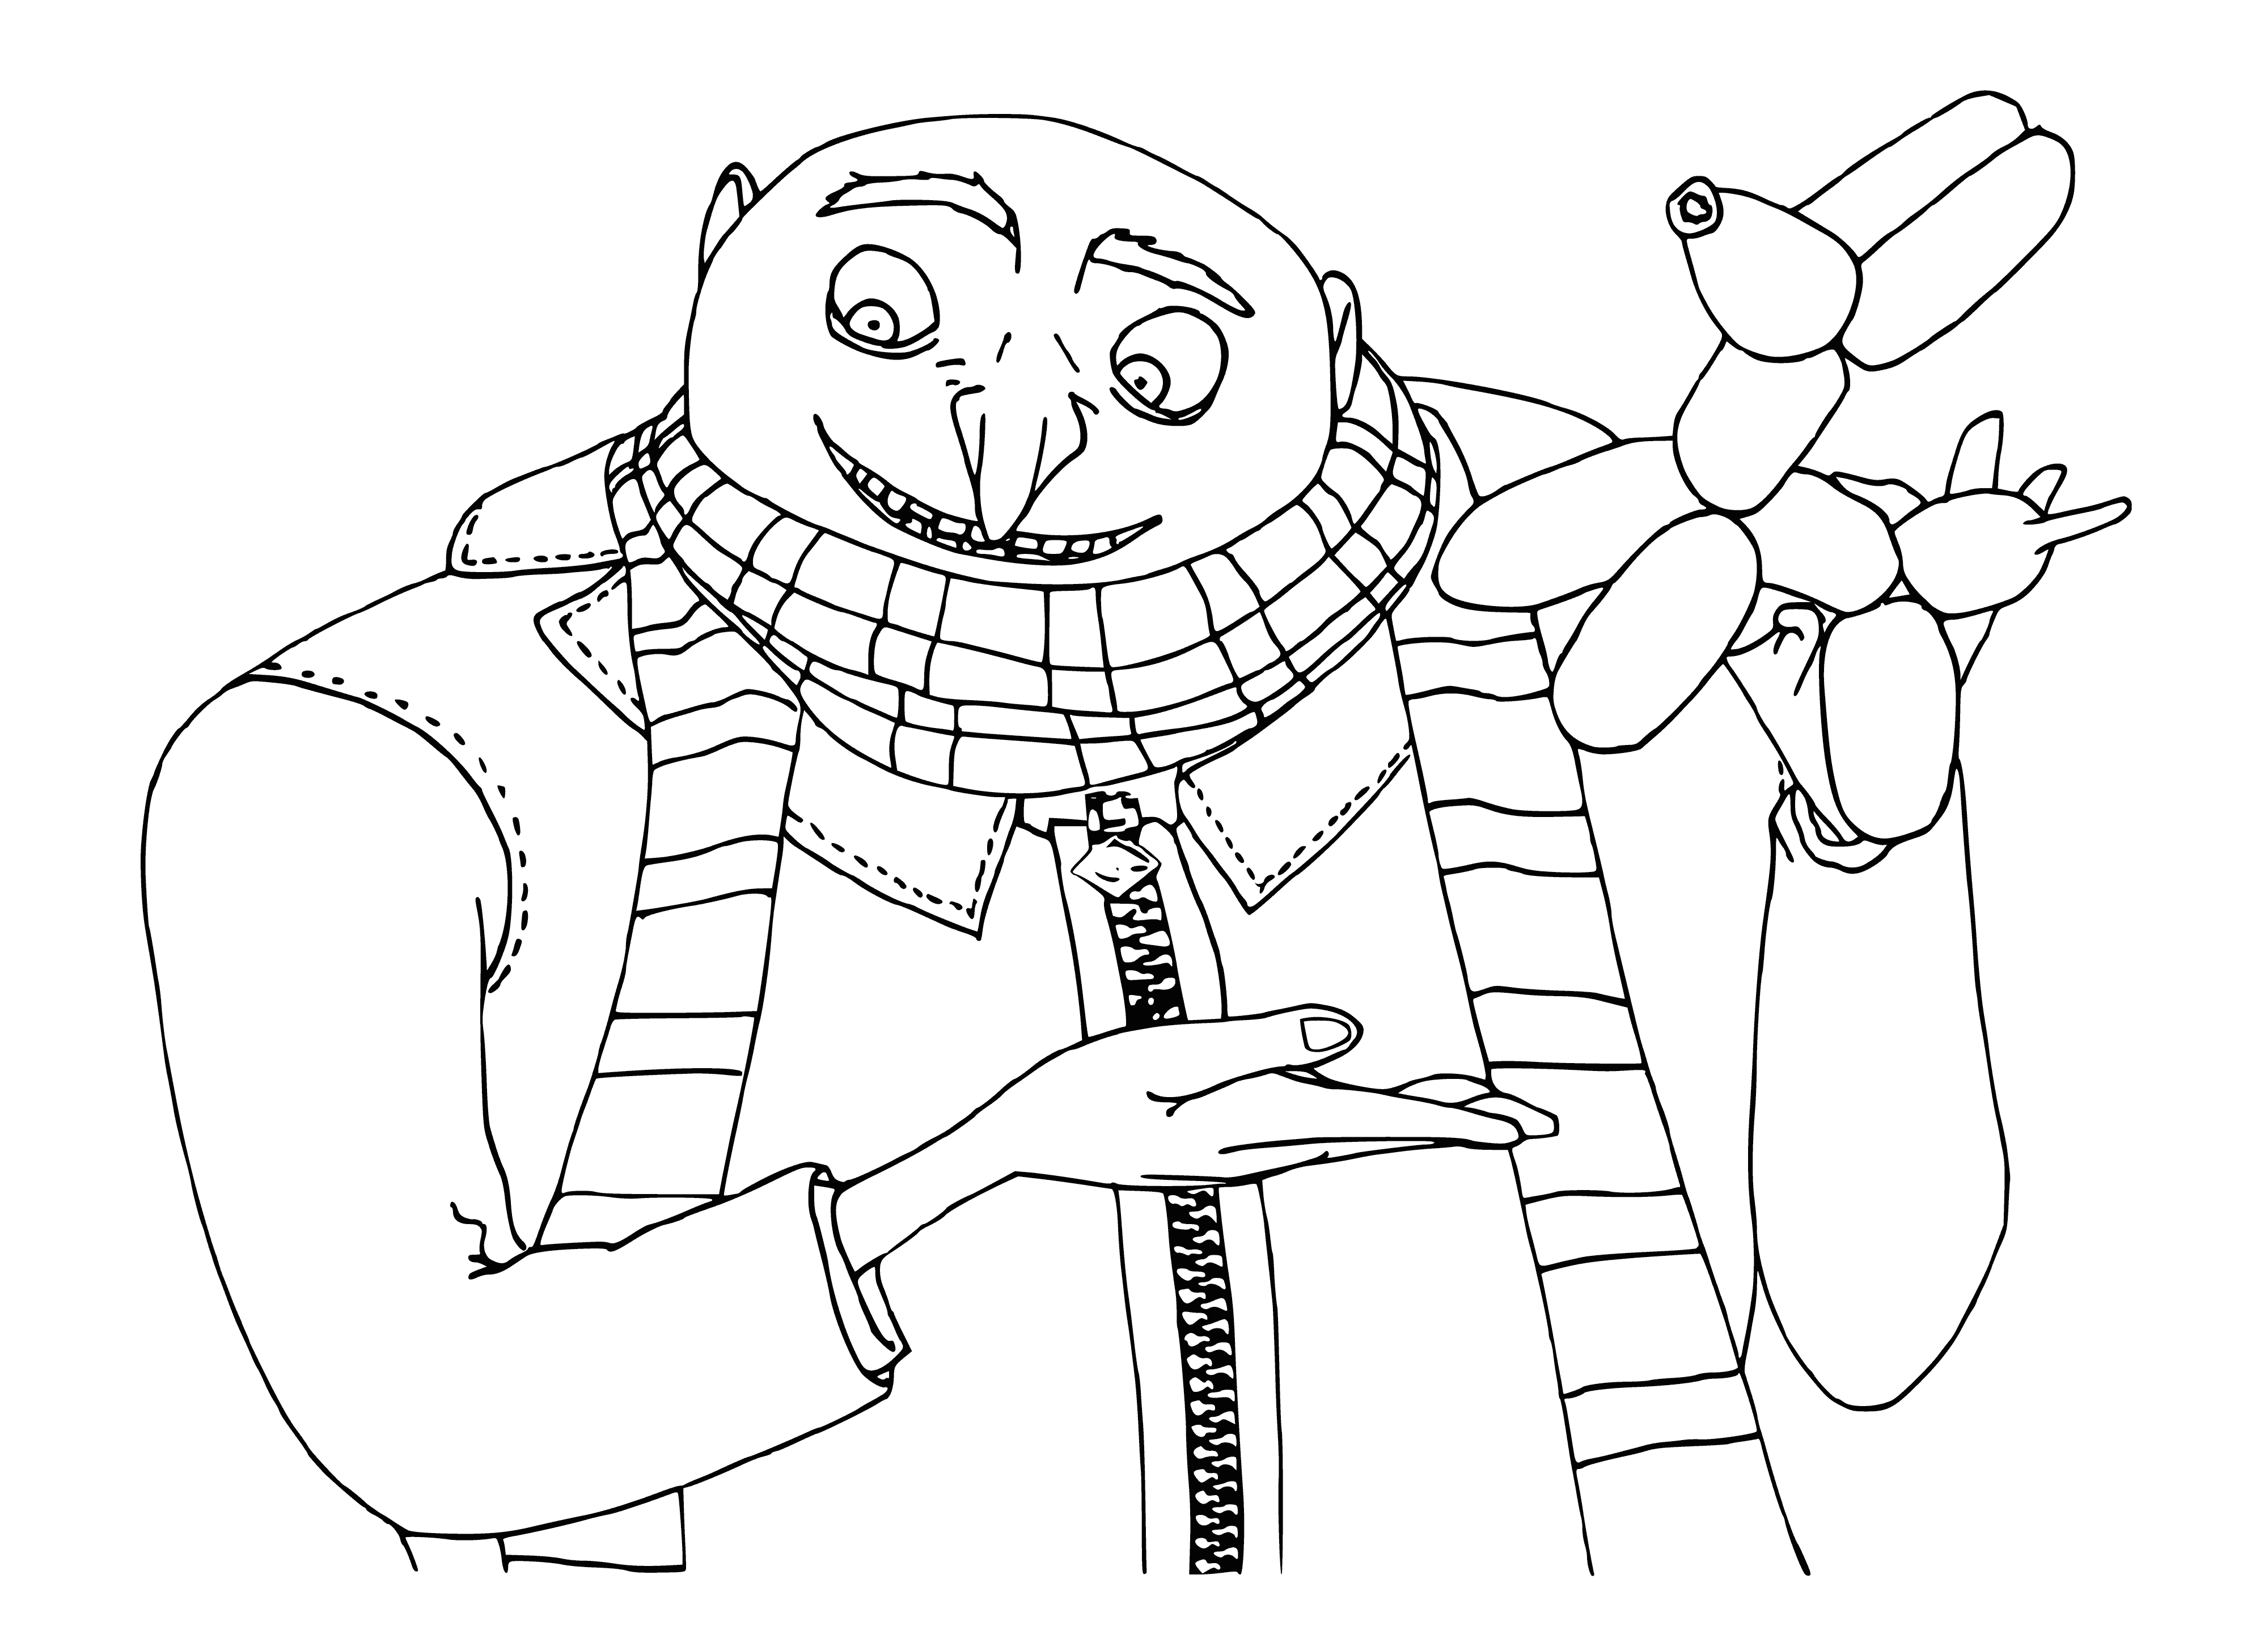 coloring page: Girl holds Minion from Despicable Me, which holds a flower. She looks very happy with a big smile. #coloringpage